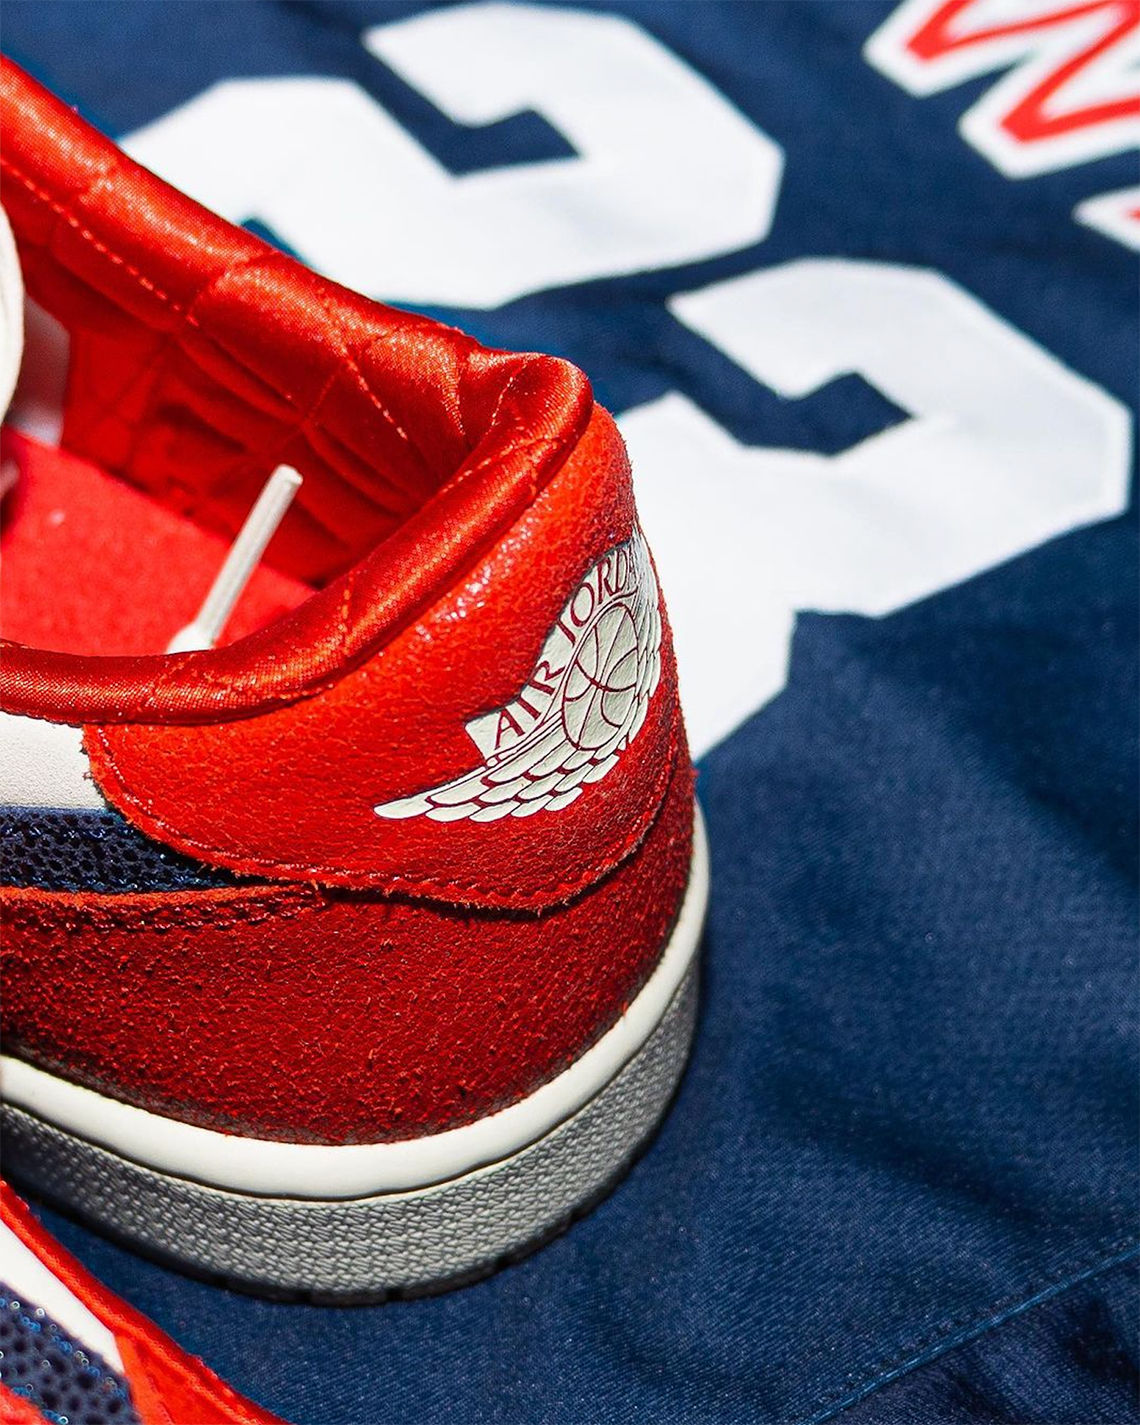 the air jordan 1 wings is limited to only 19400 pairs Og Howard University Pe 4